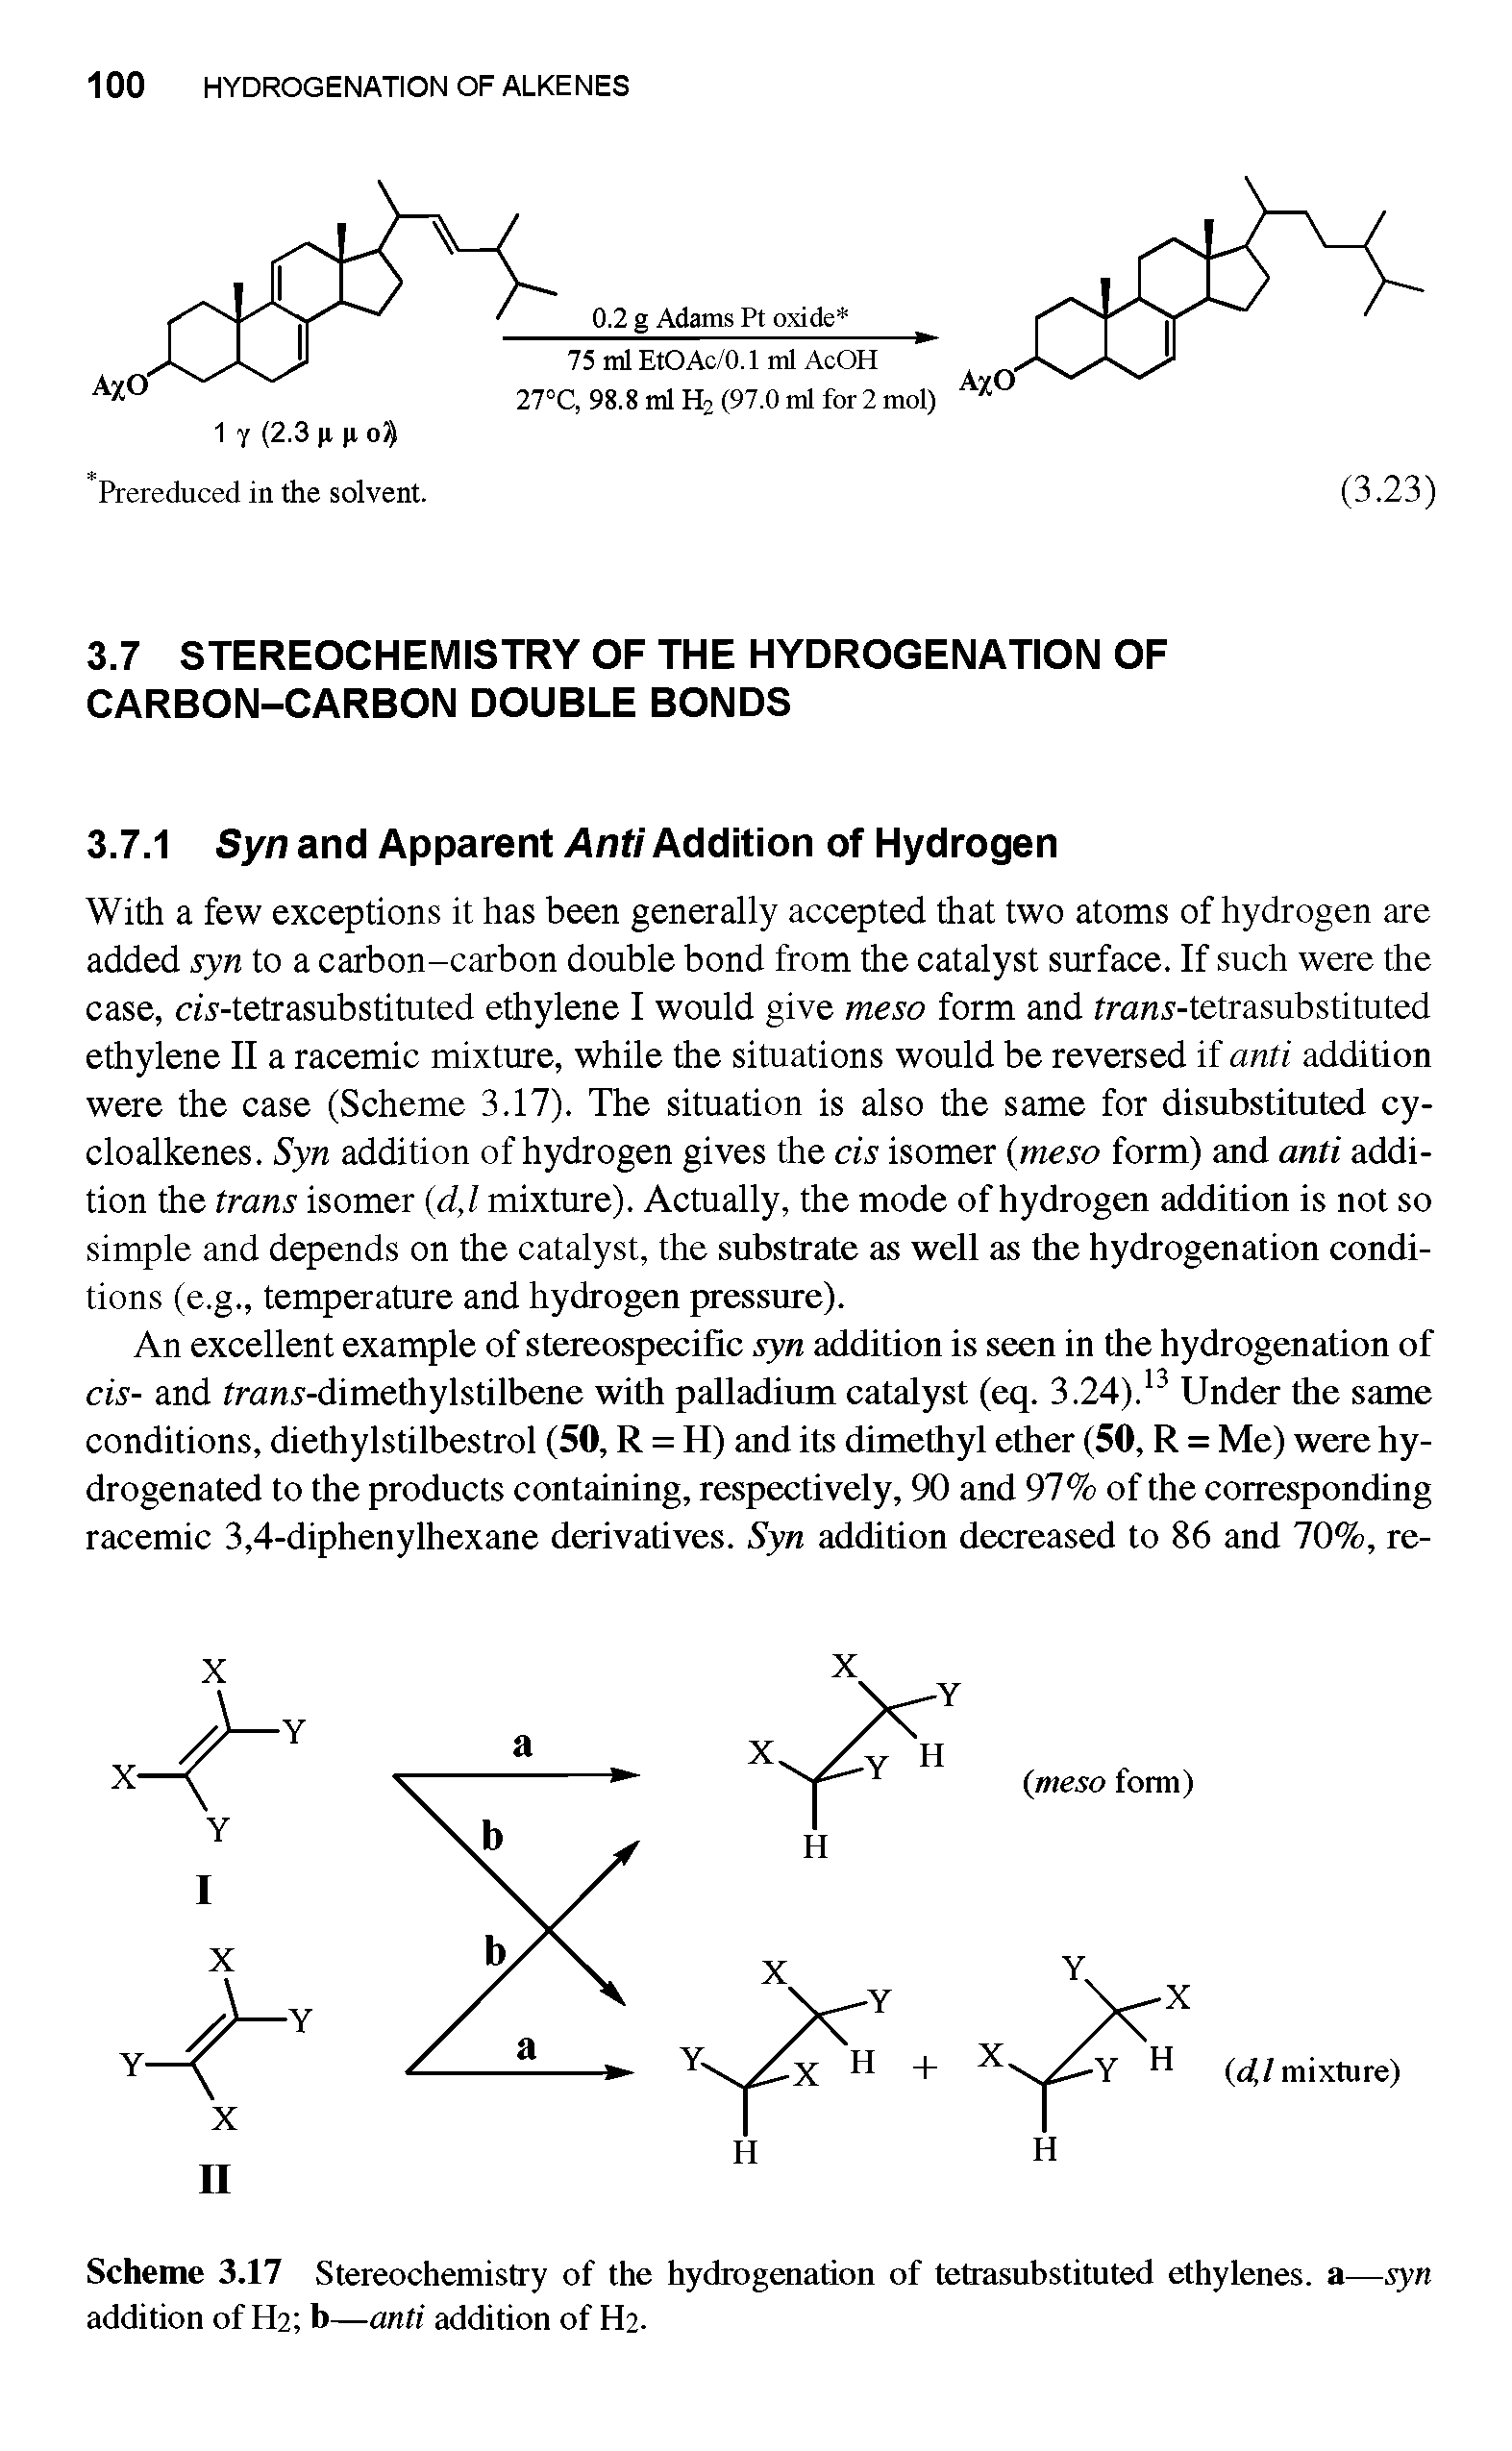 Scheme 3.17 Stereochemistry of the hydrogenation of tetrasubstituted ethylenes. a—syn addition of H2 b—anti addition of H2.